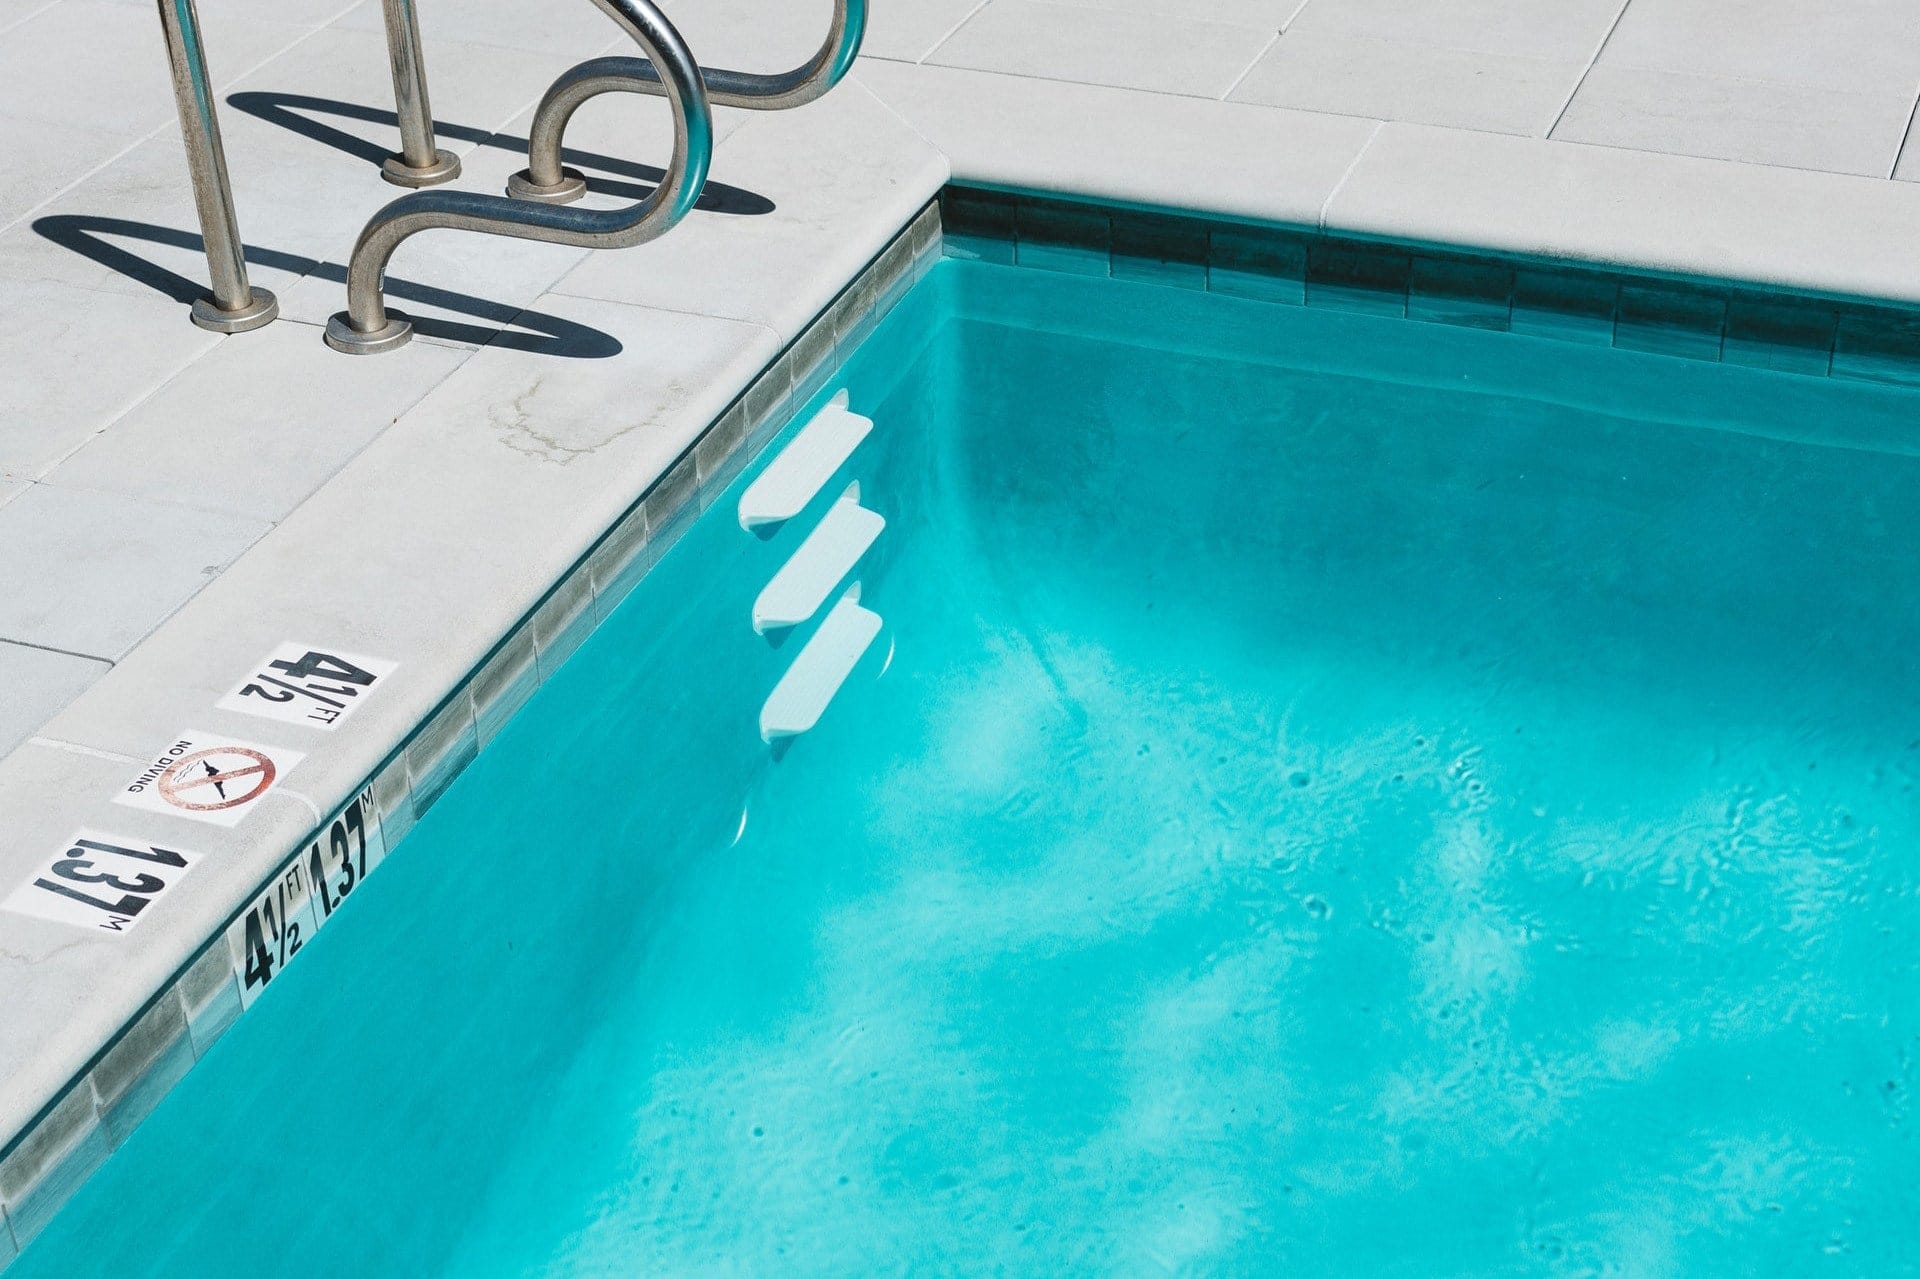 Remove Calcium Scale From Your Pool, How To Clean Glass Pool Tile With Muriatic Acid